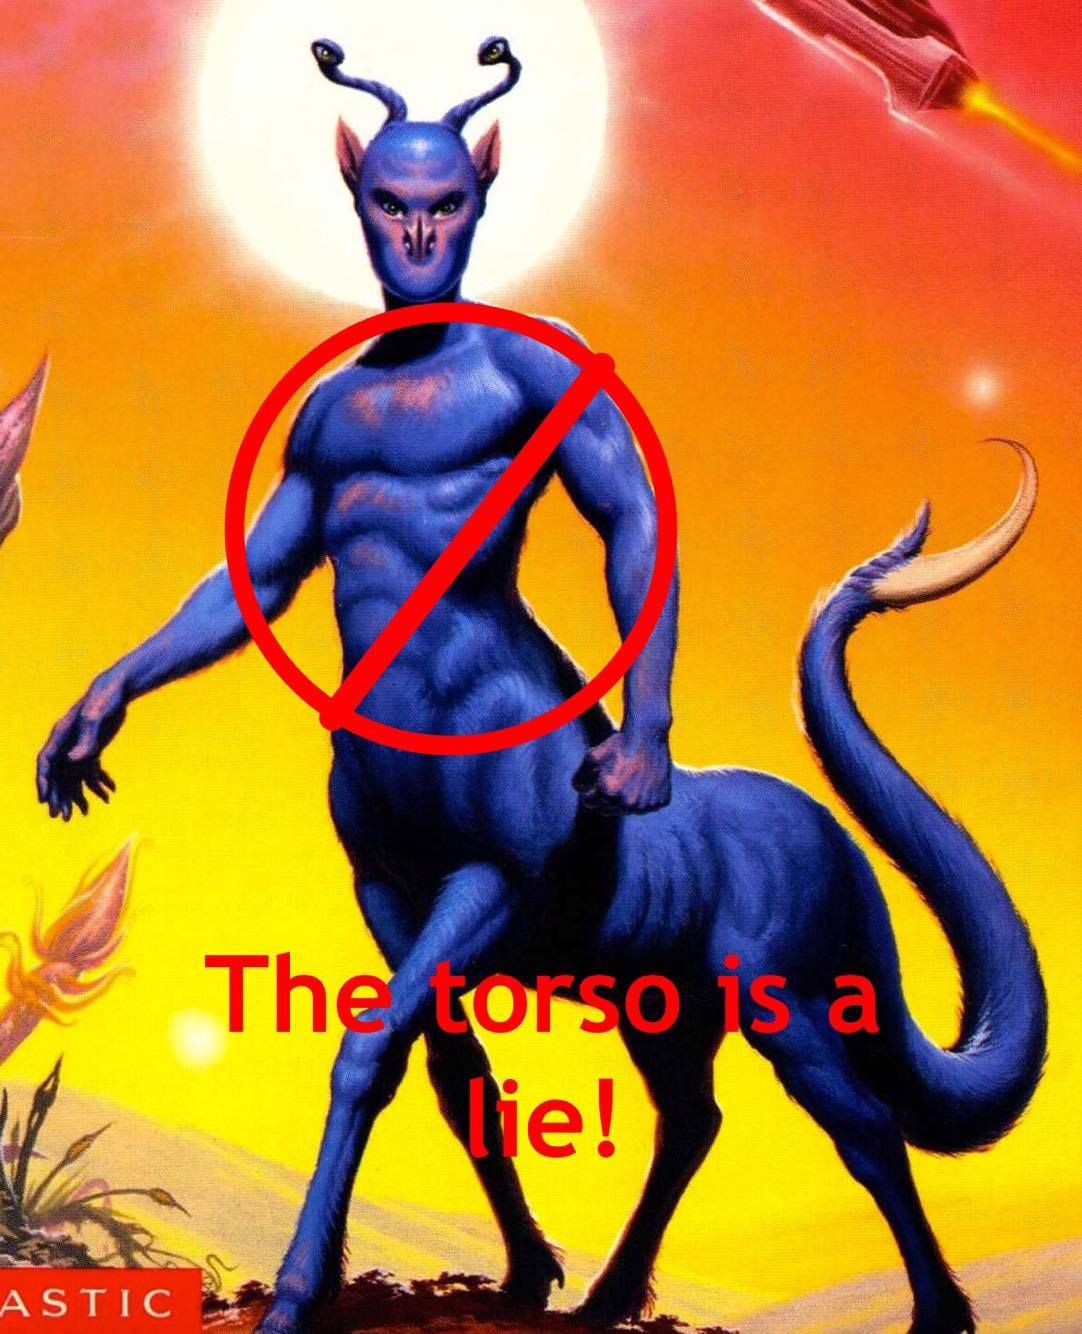 Elfangor-Sirinial-Shamtul from the cover of The Andalite Chronicles, with an international no symbol superimposed over his chest.  Beneath is text reading 'The torso is a lie!'